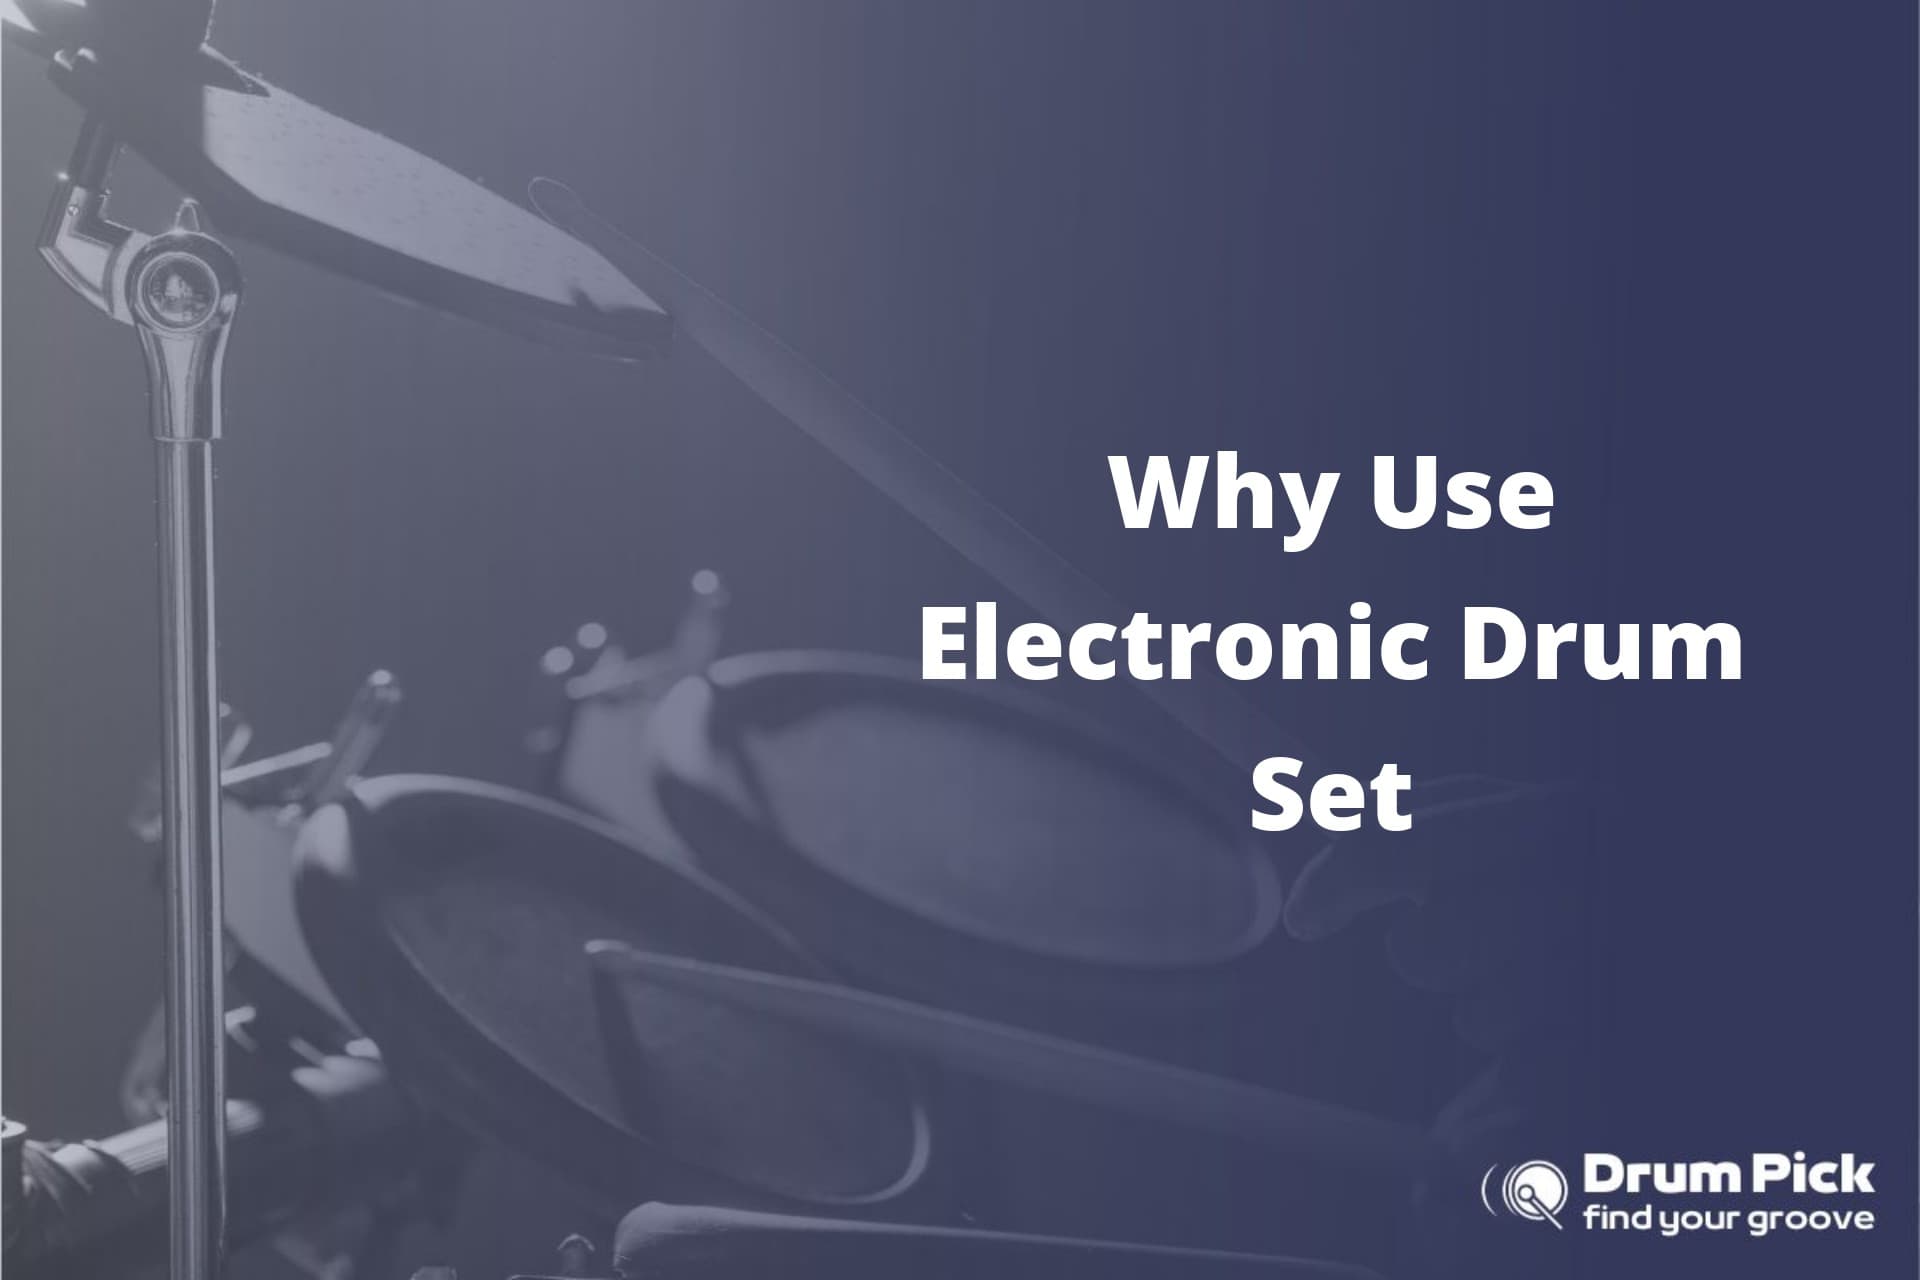 Why Use Electronic Drum Set